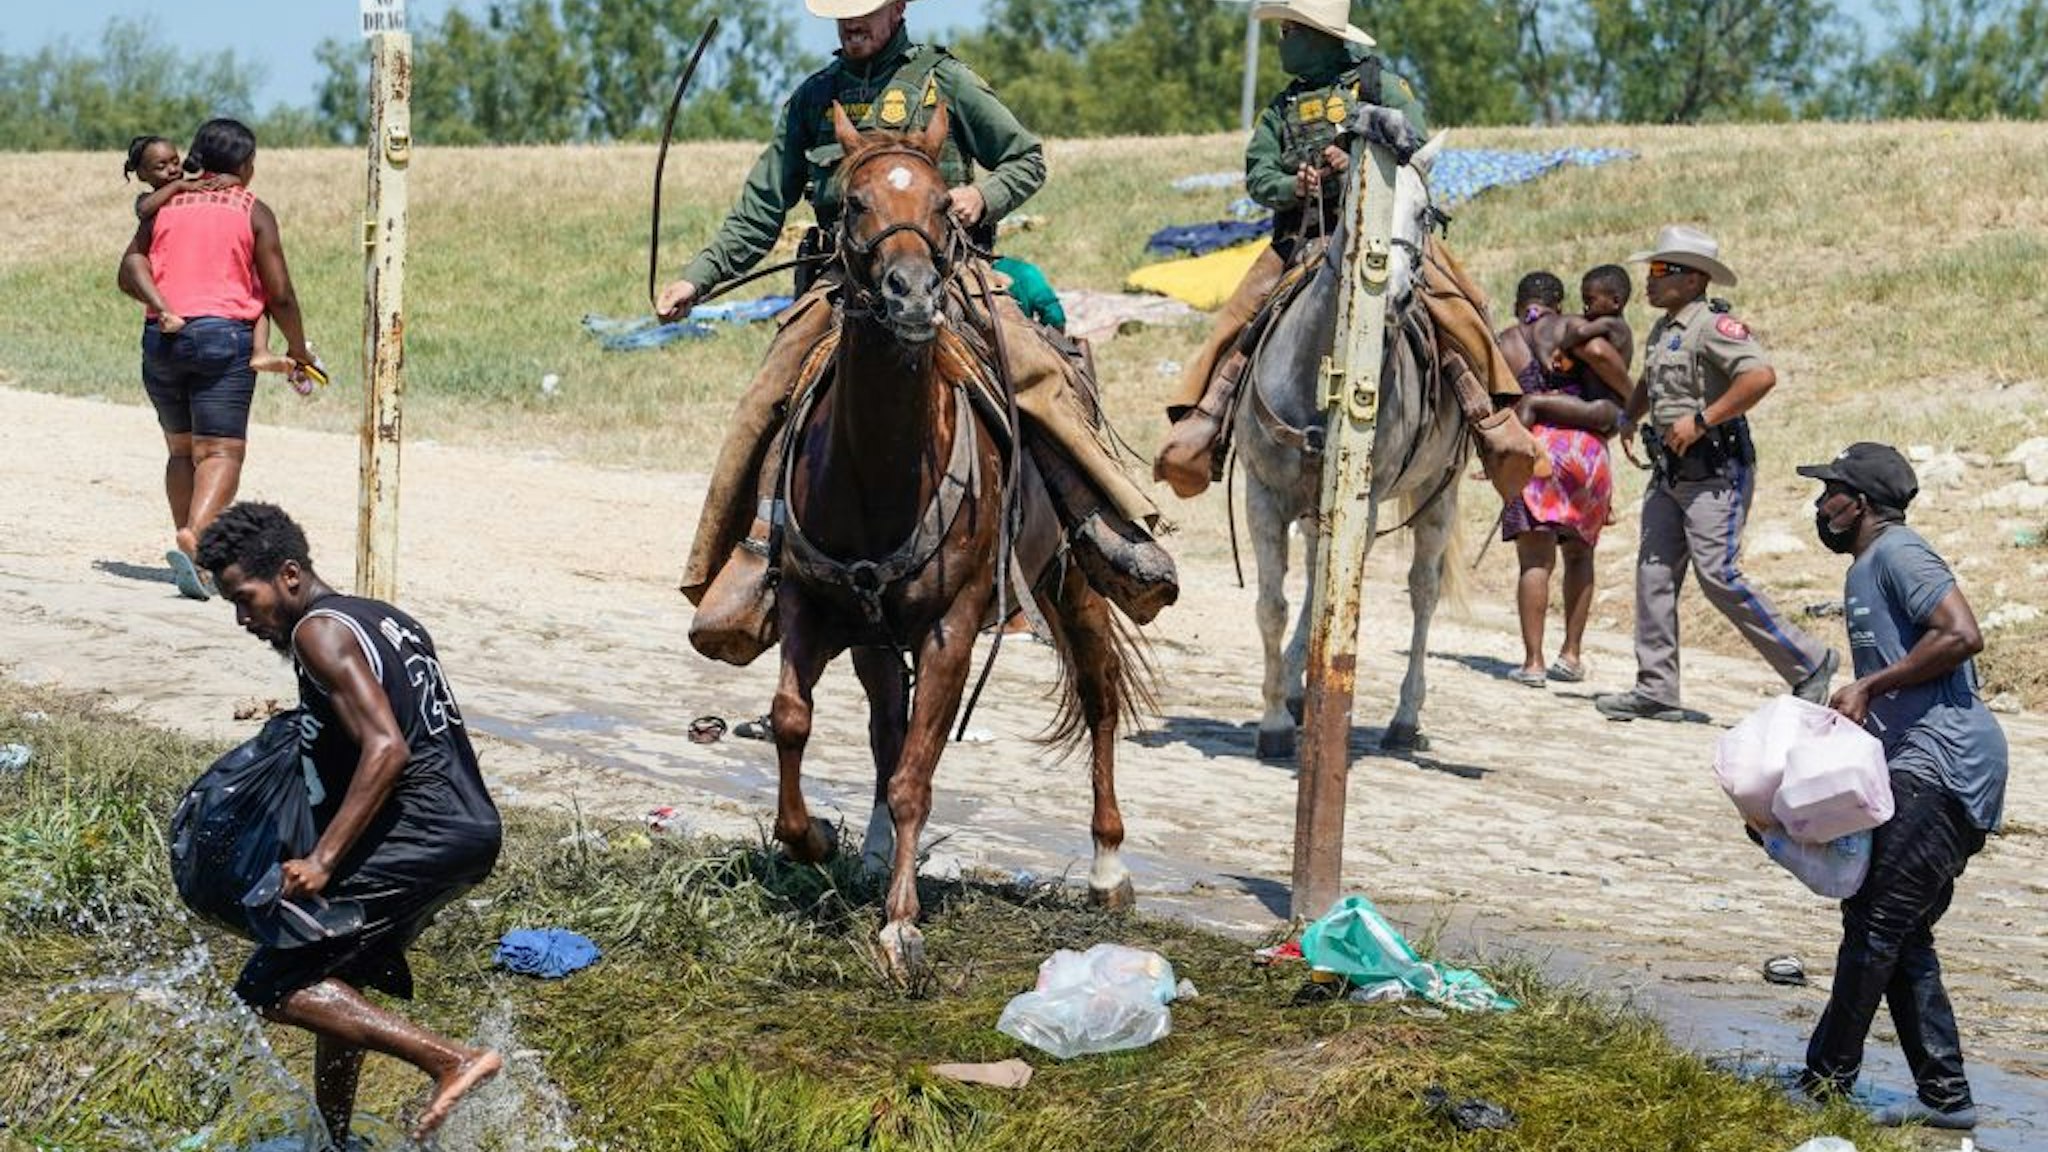 United States Border Patrol agents on horseback try to stop Haitian migrants from entering an encampment on the banks of the Rio Grande near the Acuna Del Rio International Bridge in Del Rio, Texas on September 19, 2021.